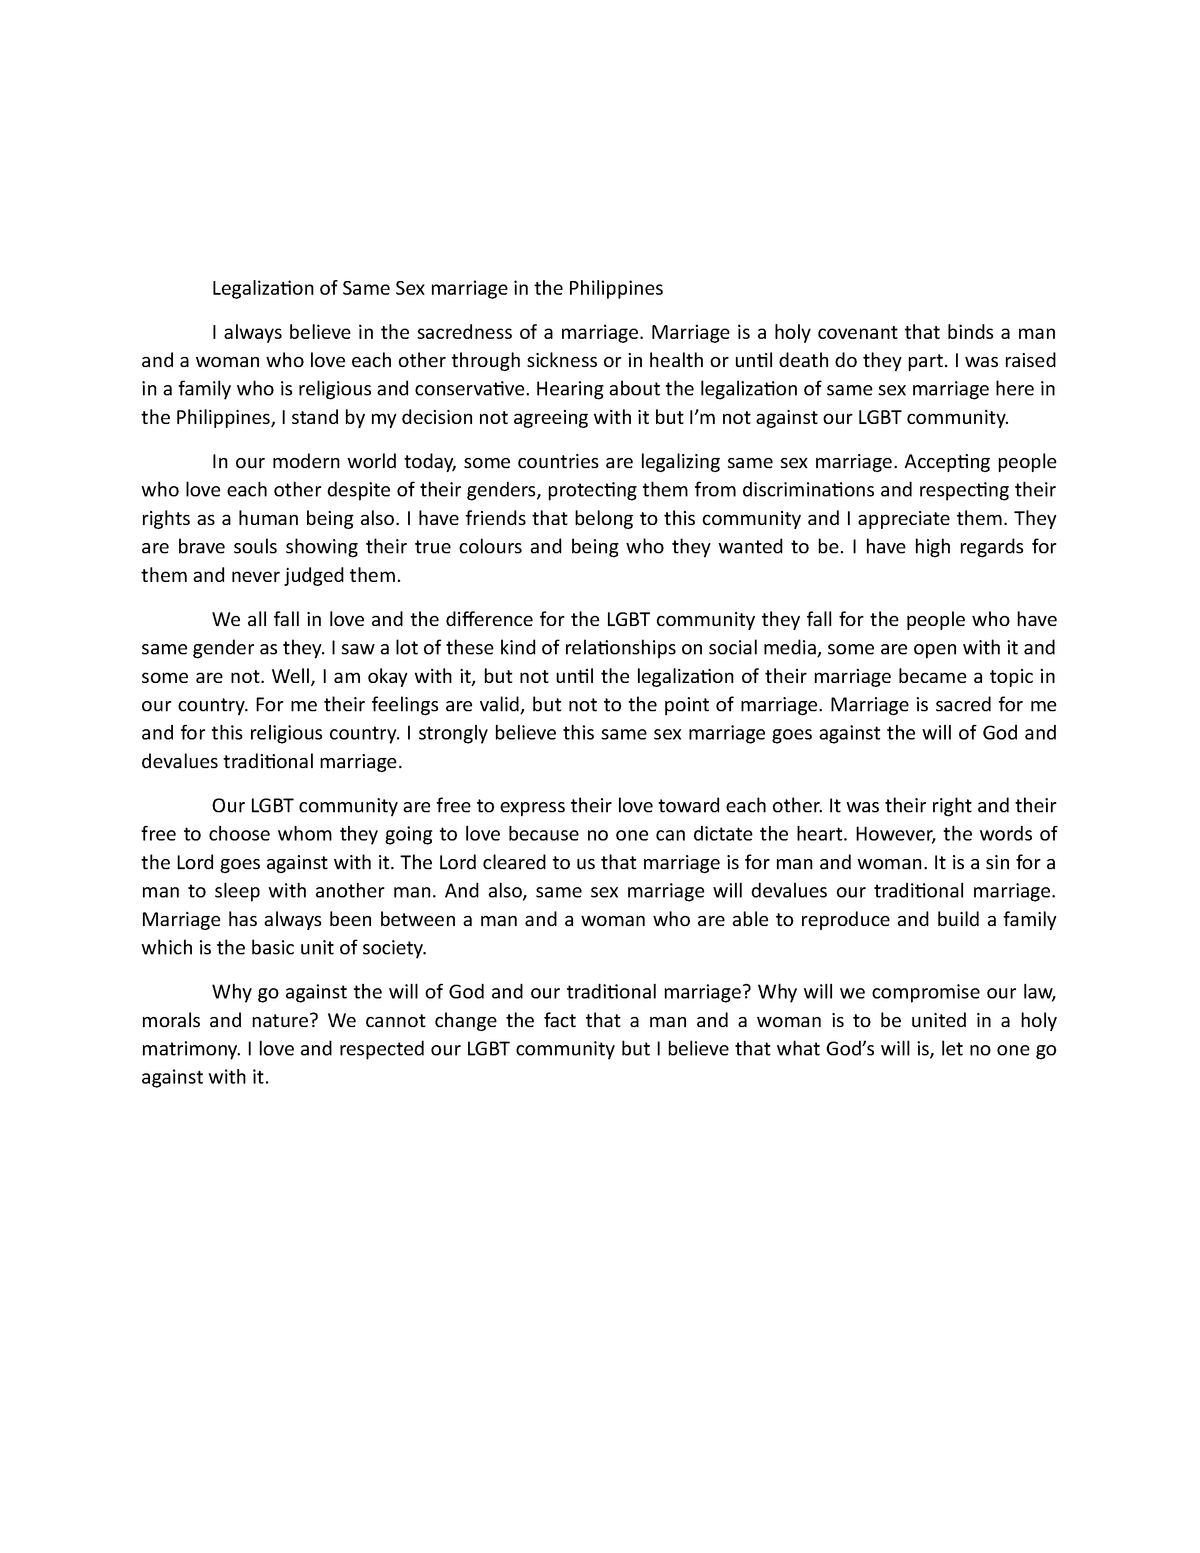 argumentative essay about same sex marriage in the philippines